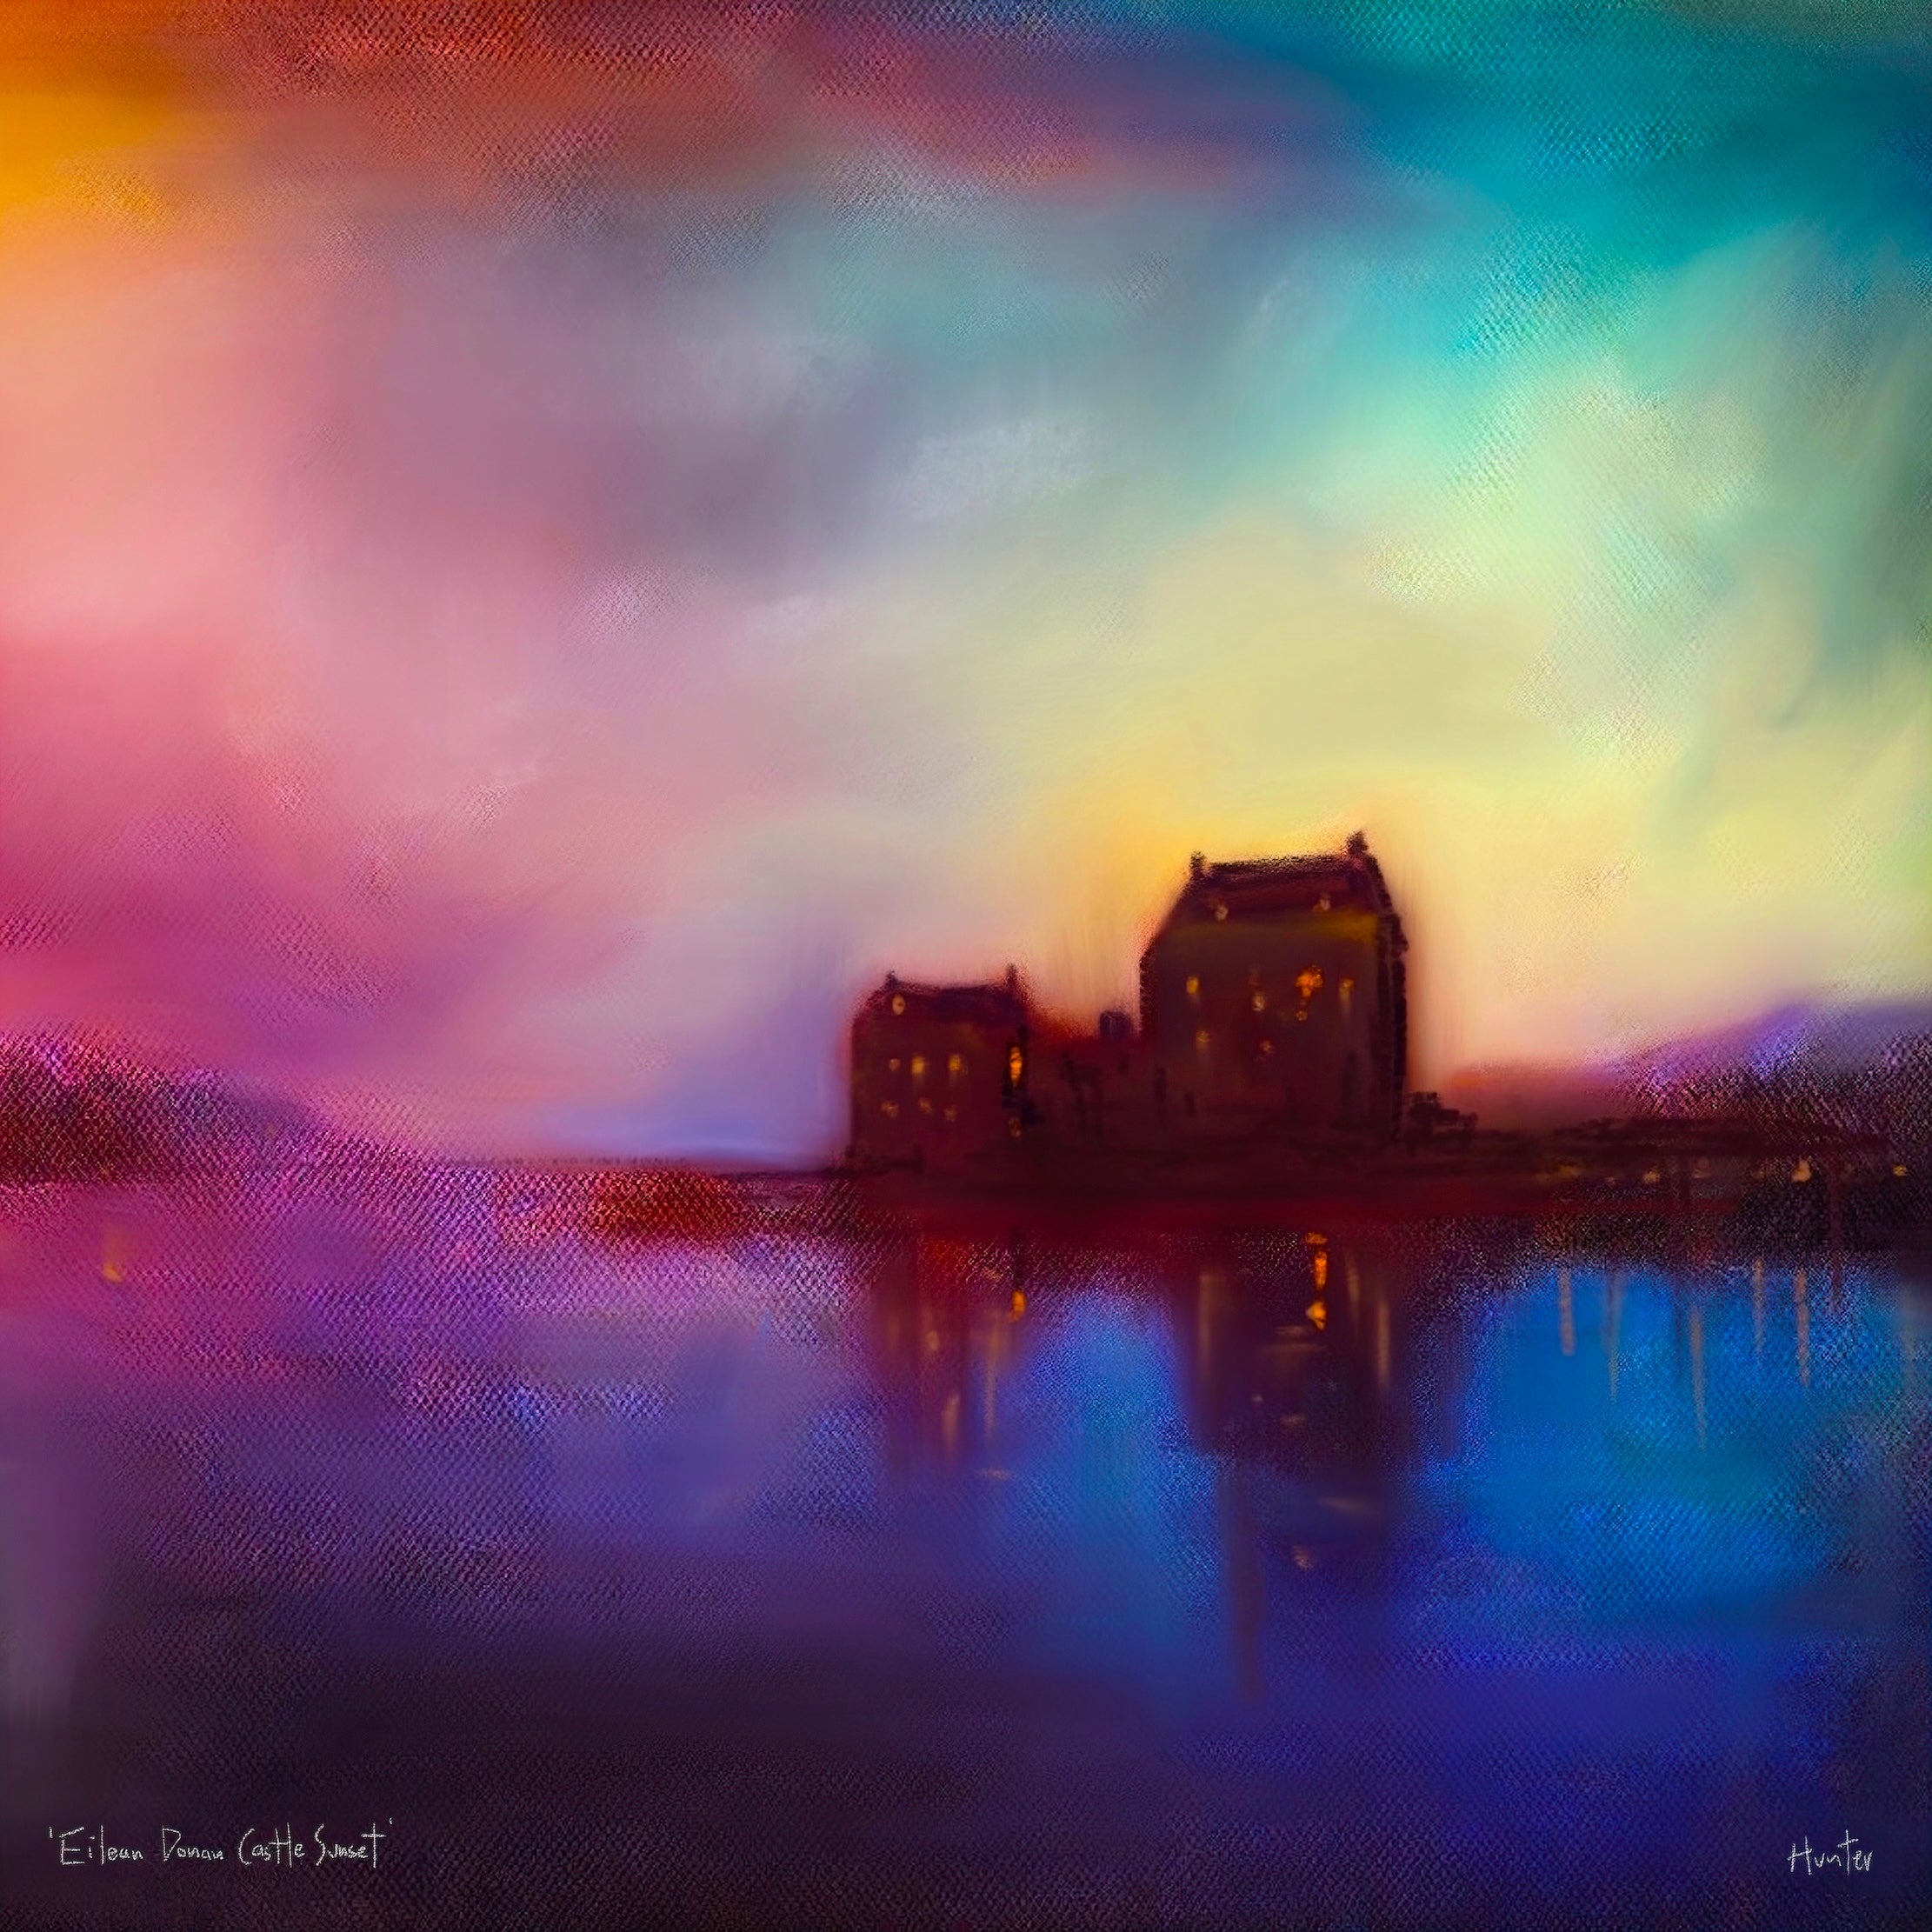 Eilean Donan Castle Sunset | Scotland In Your Pocket Art Print-Scotland In Your Pocket Framed Prints-Historic & Iconic Scotland Art Gallery-Paintings, Prints, Homeware, Art Gifts From Scotland By Scottish Artist Kevin Hunter